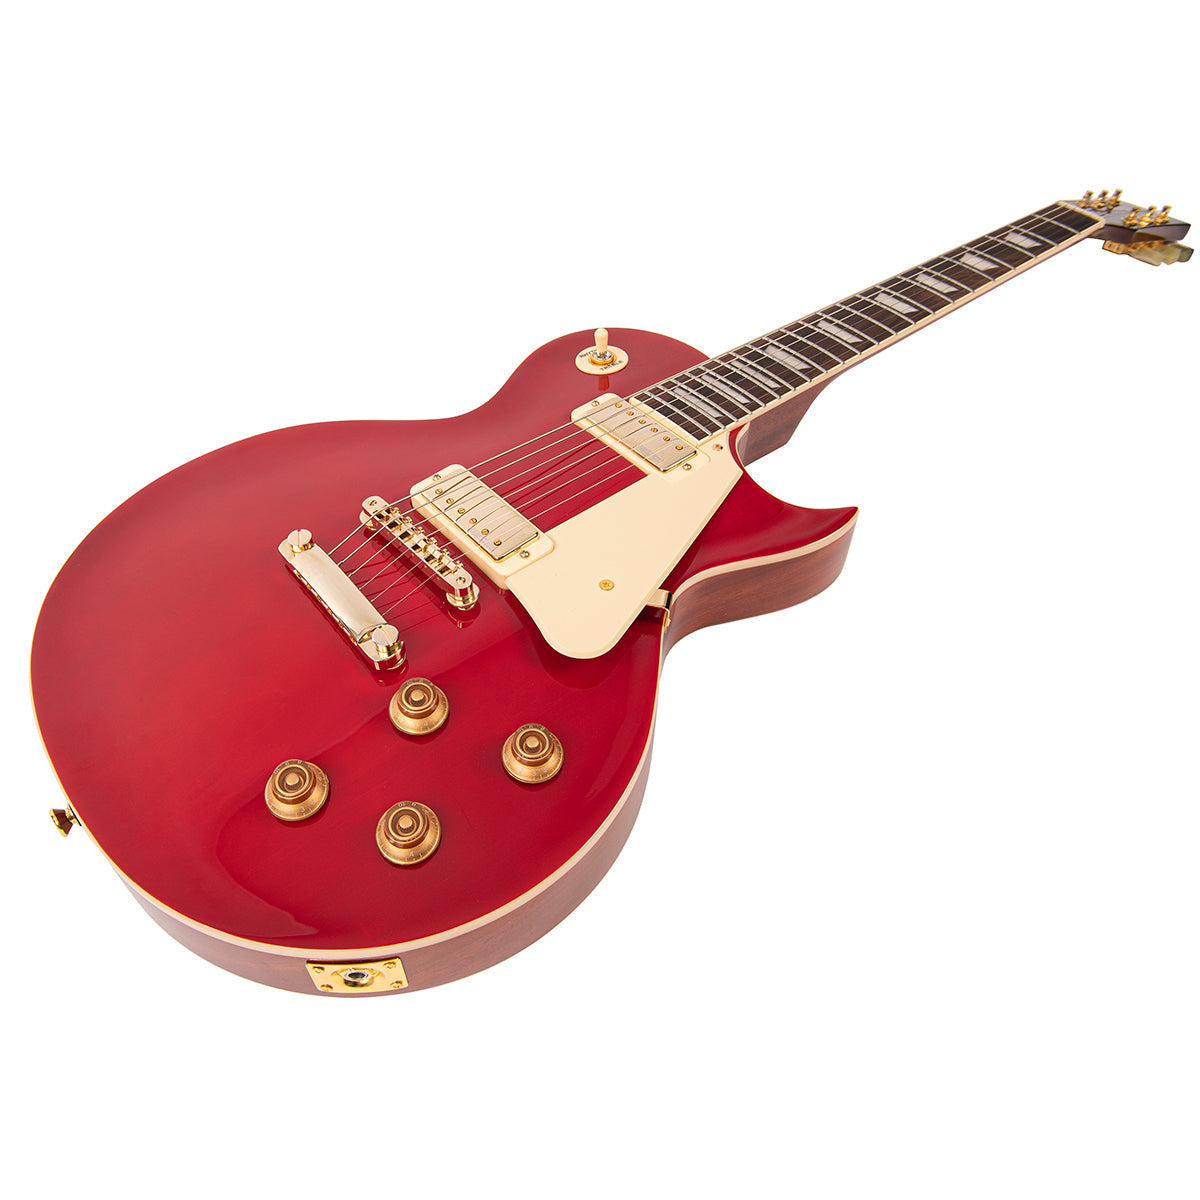 Vintage V100M Mini Double Coil ReIssued Electric Guitar ~ Wine Red, Electric Guitar for sale at Richards Guitars.